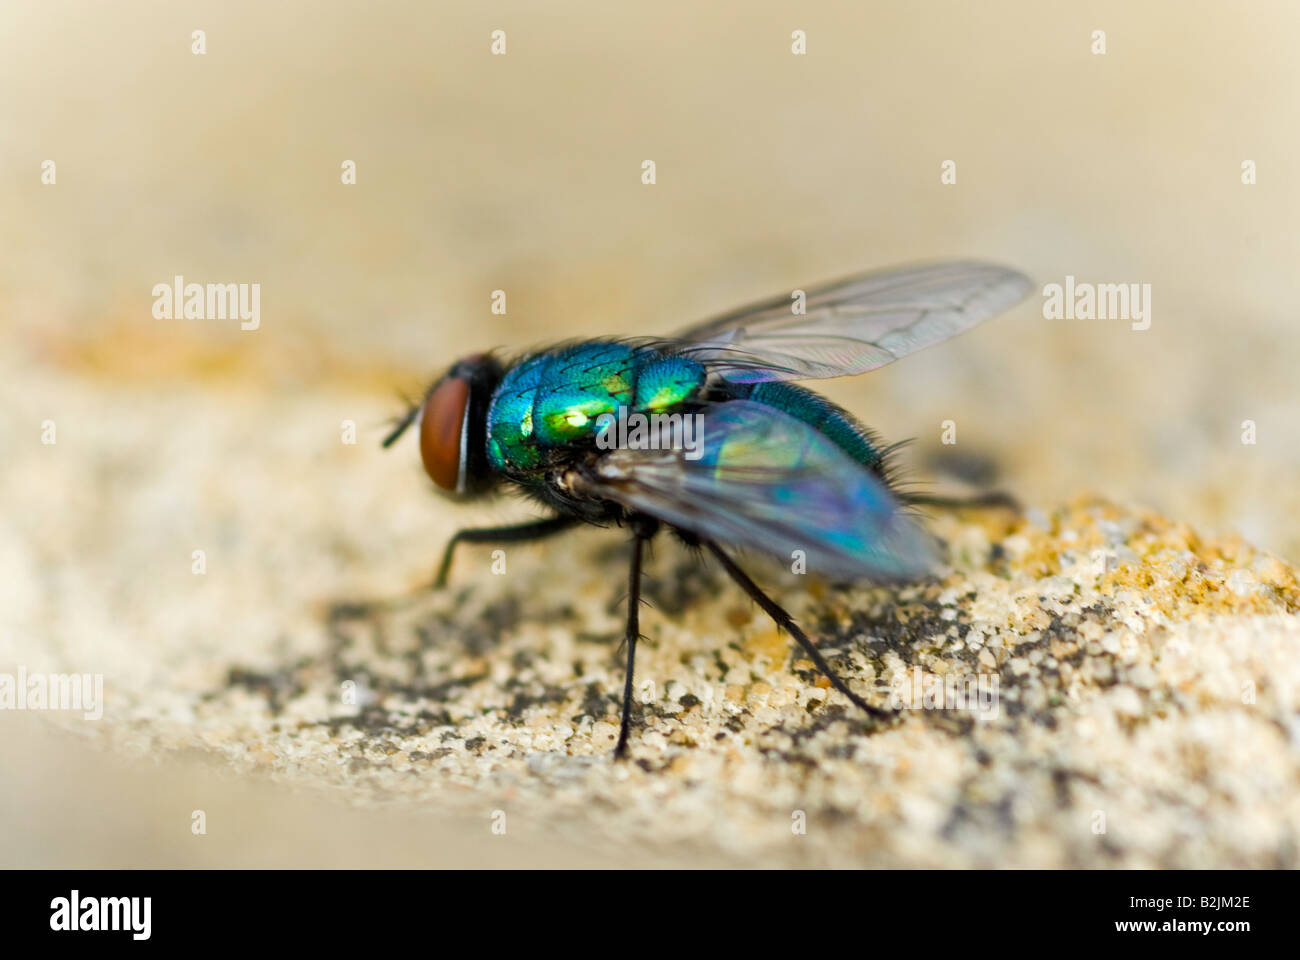 Horizontal close up macro of a Blow fly [Phaenicia sericata] sitting on a wall, it's iridescent body glistening in the sun Stock Photo